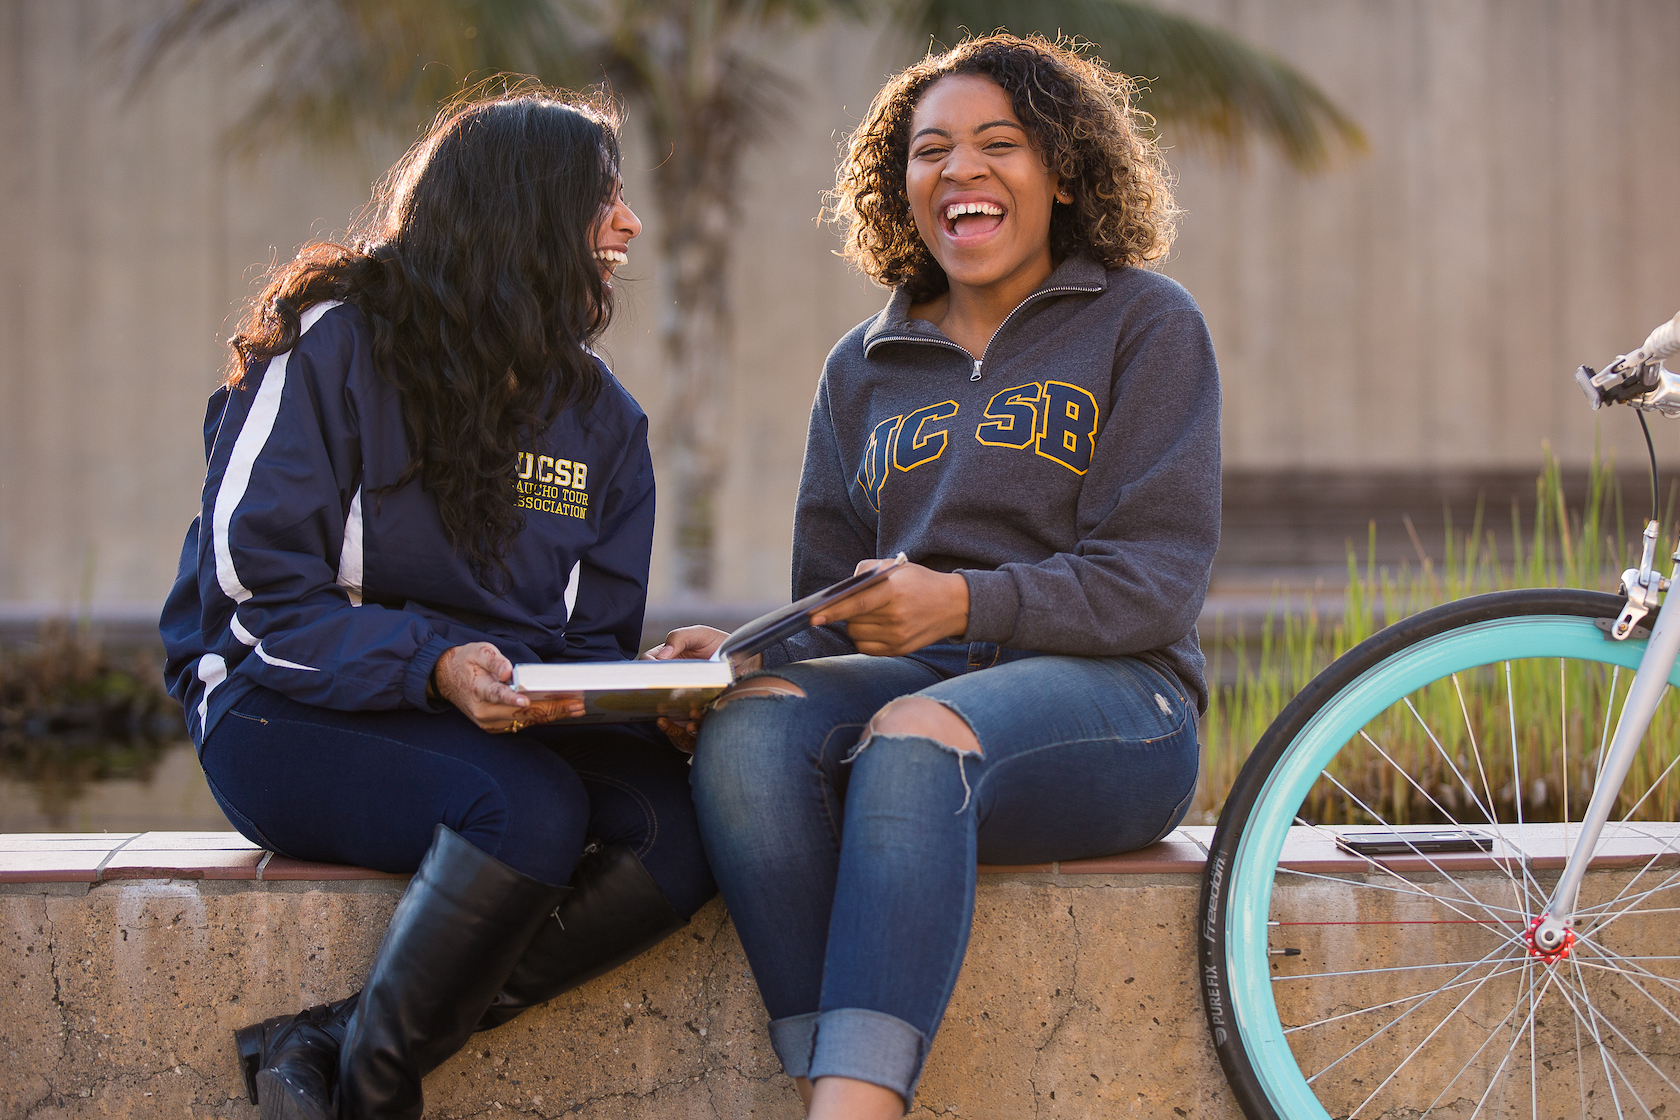 ucsb students laughing